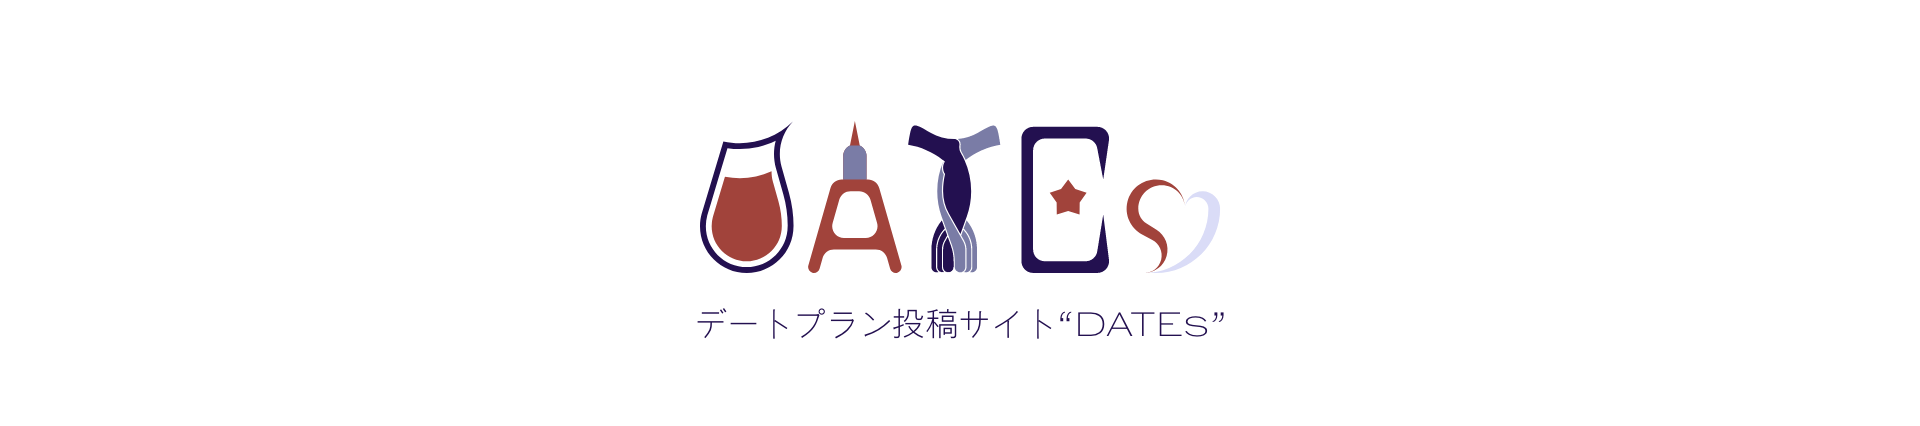 dates_about_search